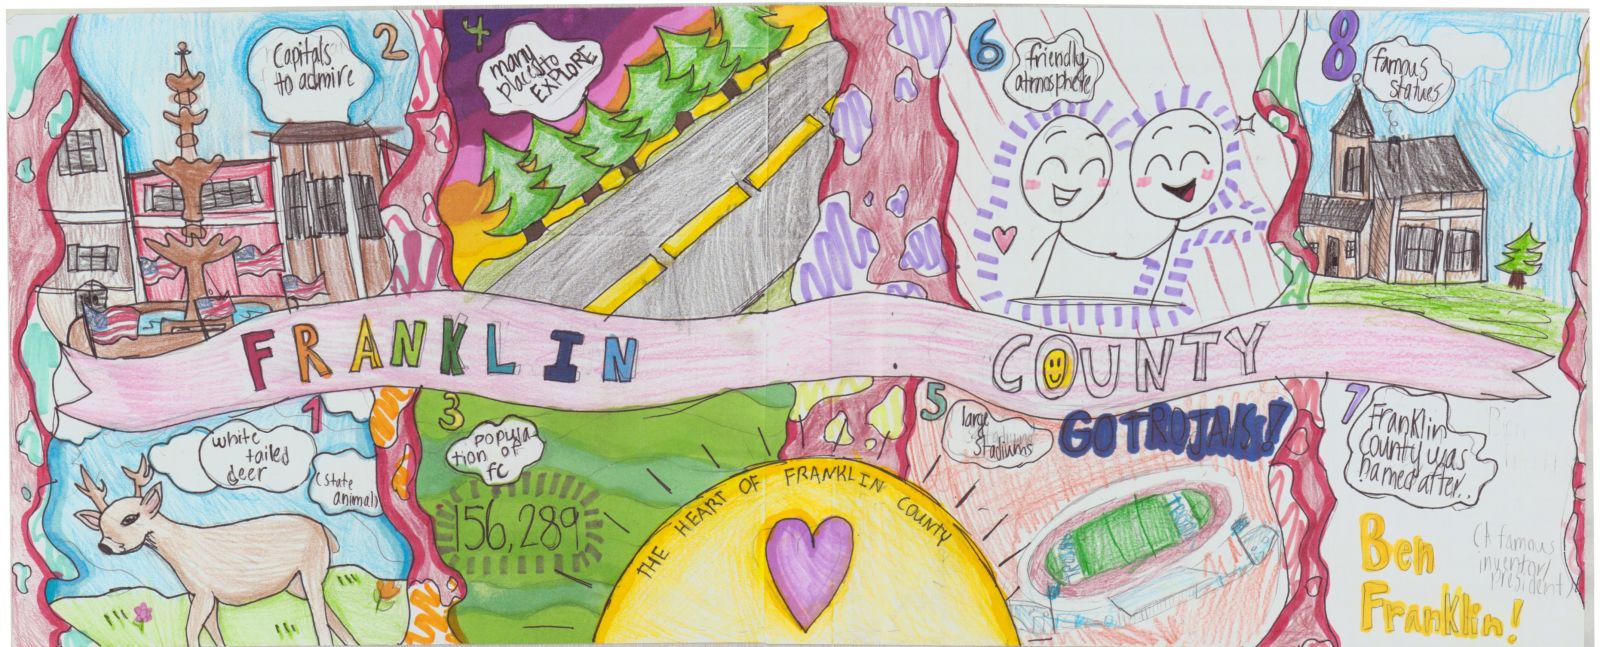 First-place entry by Sumeja Korkutovic, South Hamilton Elementary School 